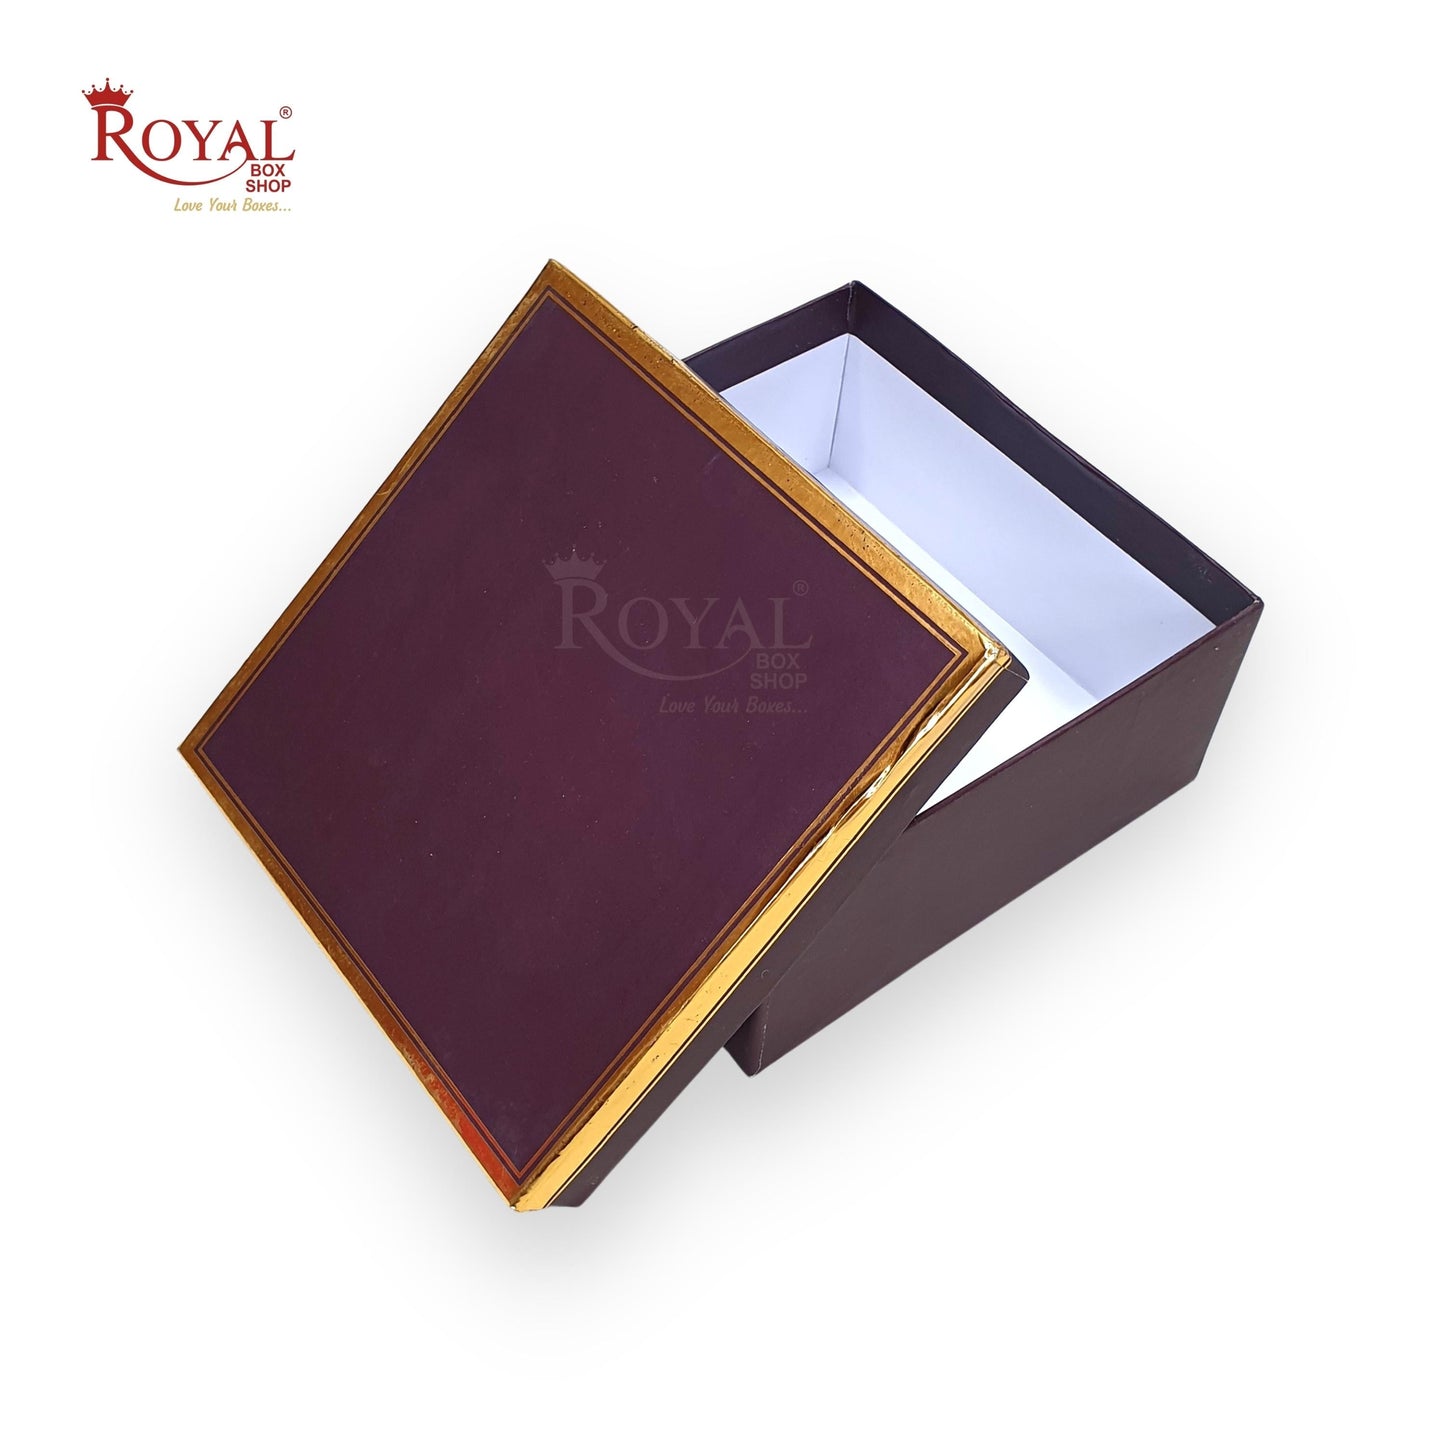 Hamper Gift Boxes I 7x7x3.5 Inches I Wine Color with Gold Foiling I For Return Wedding Corporate Hamper Gifts Box Royal Box Shop